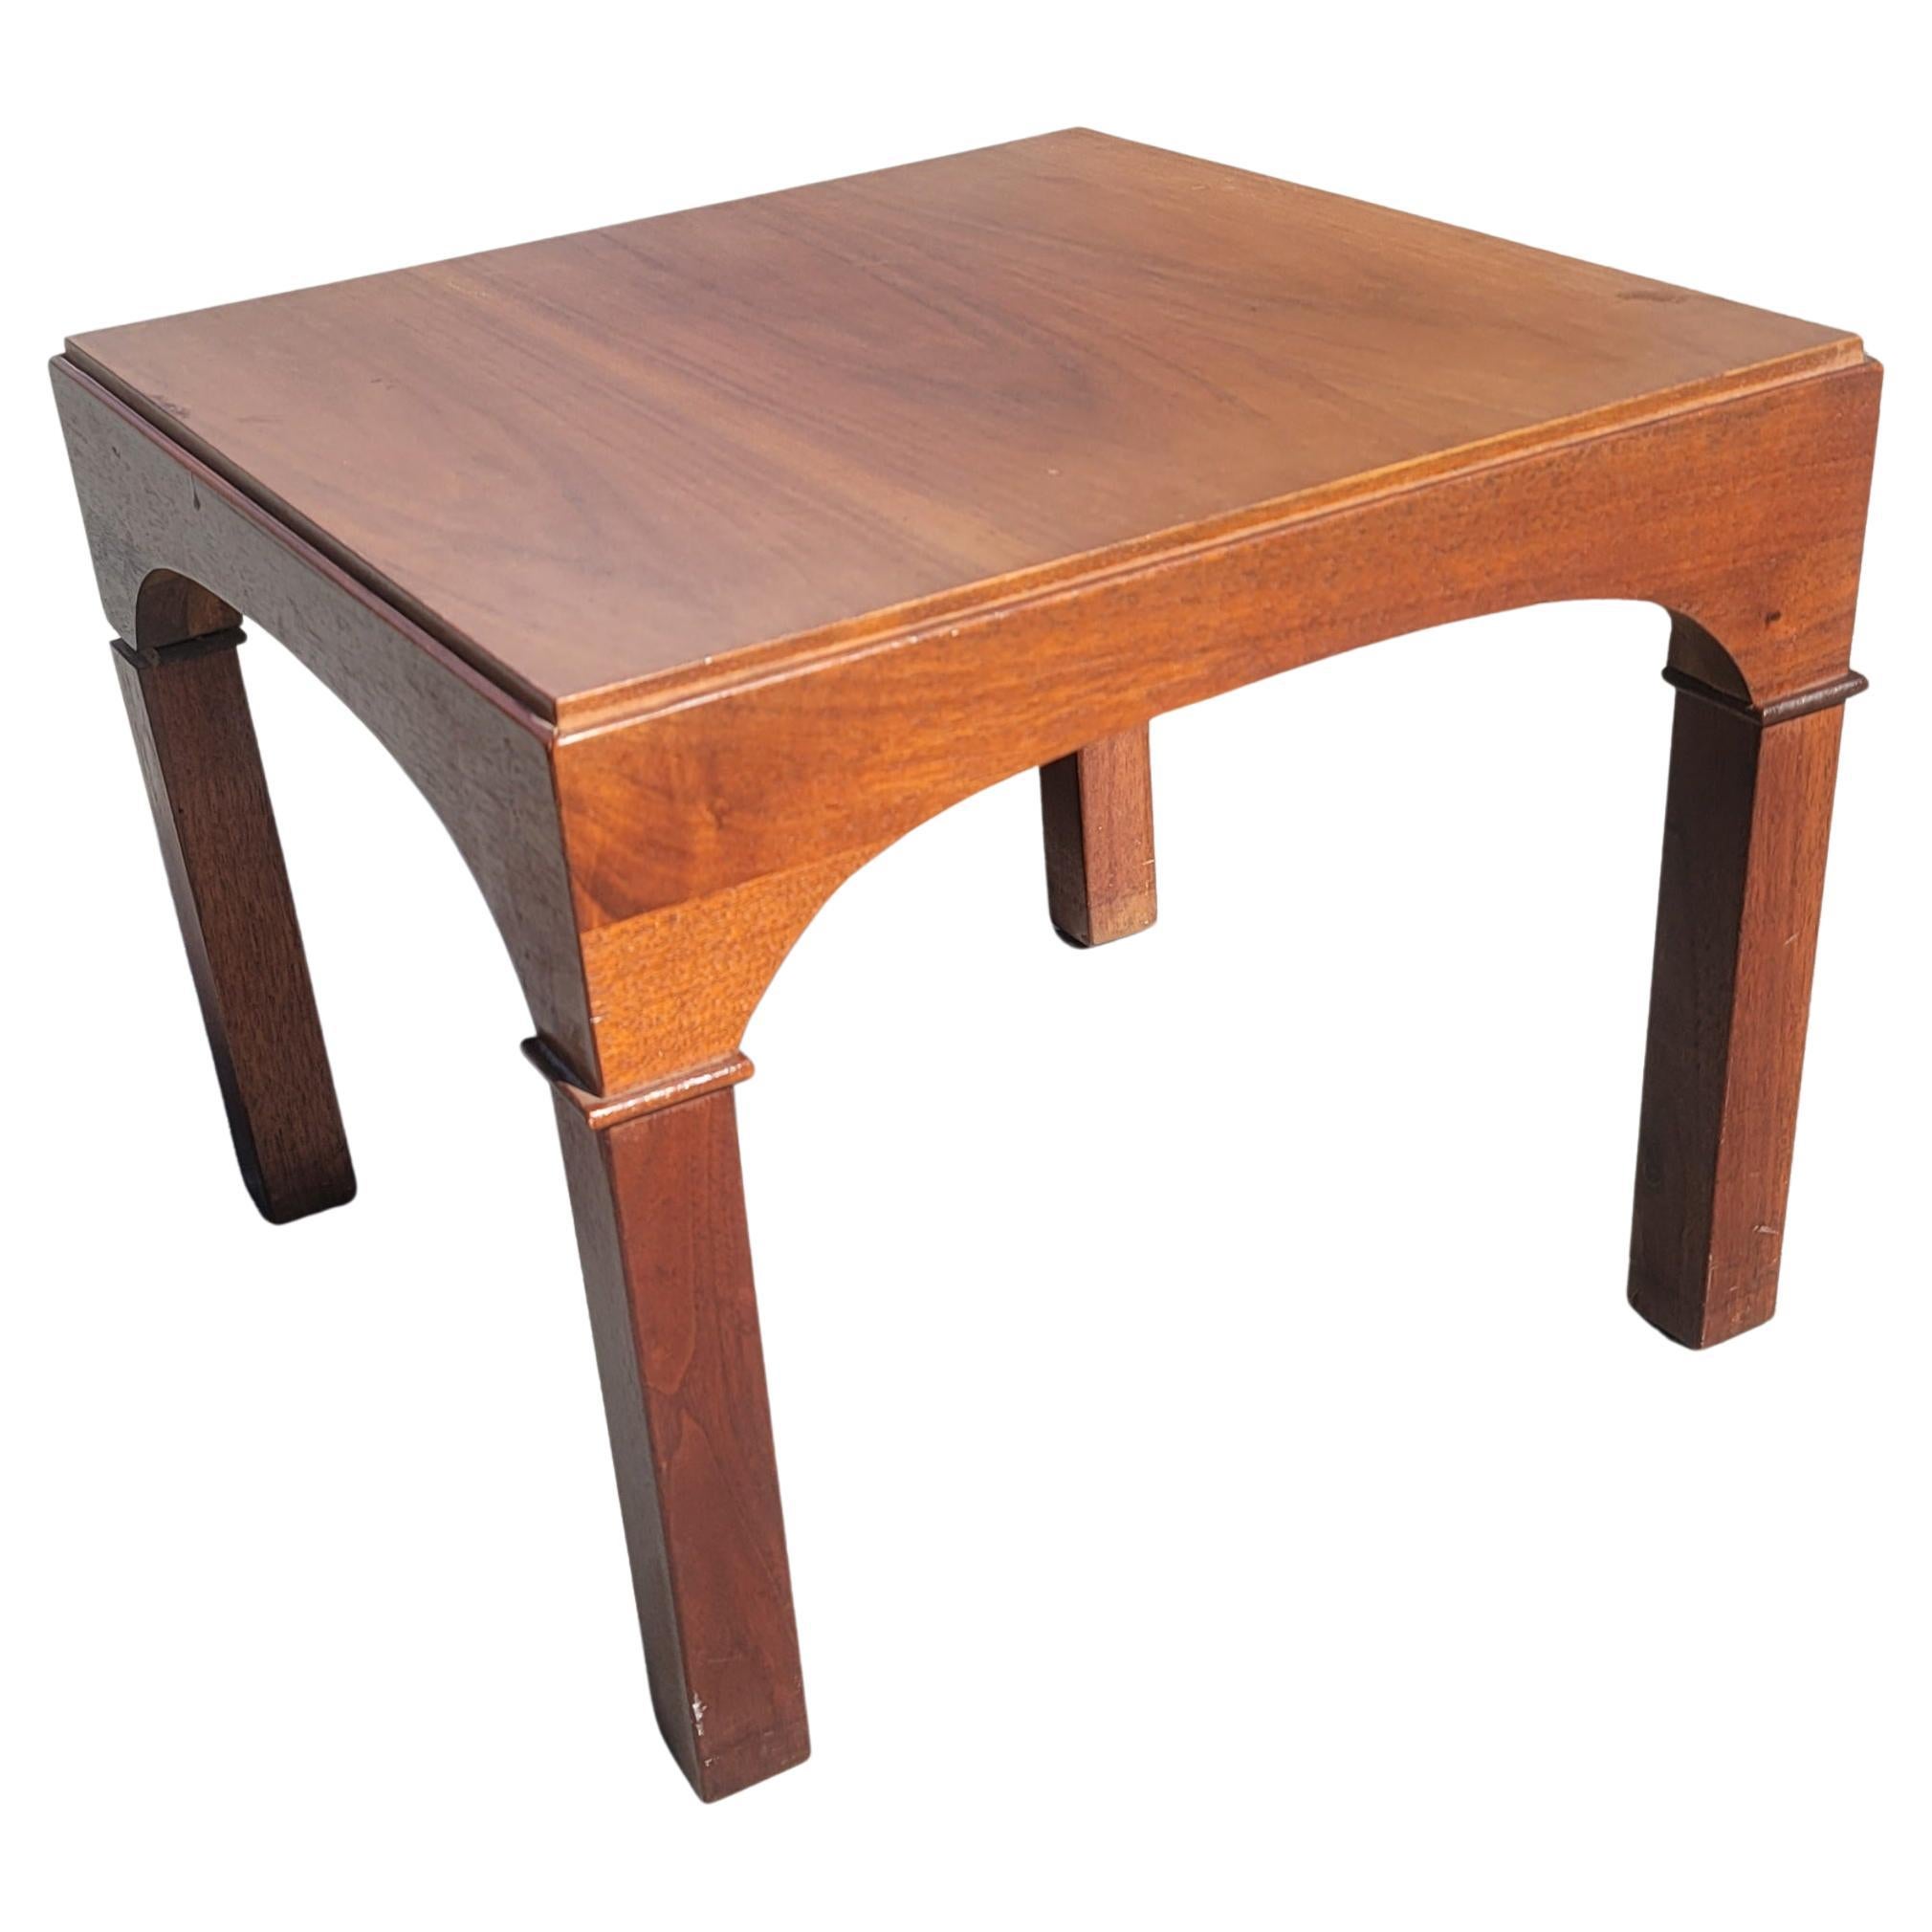 A Pair of Mid-Century Modern parson side table In walnut, measuring 18.25